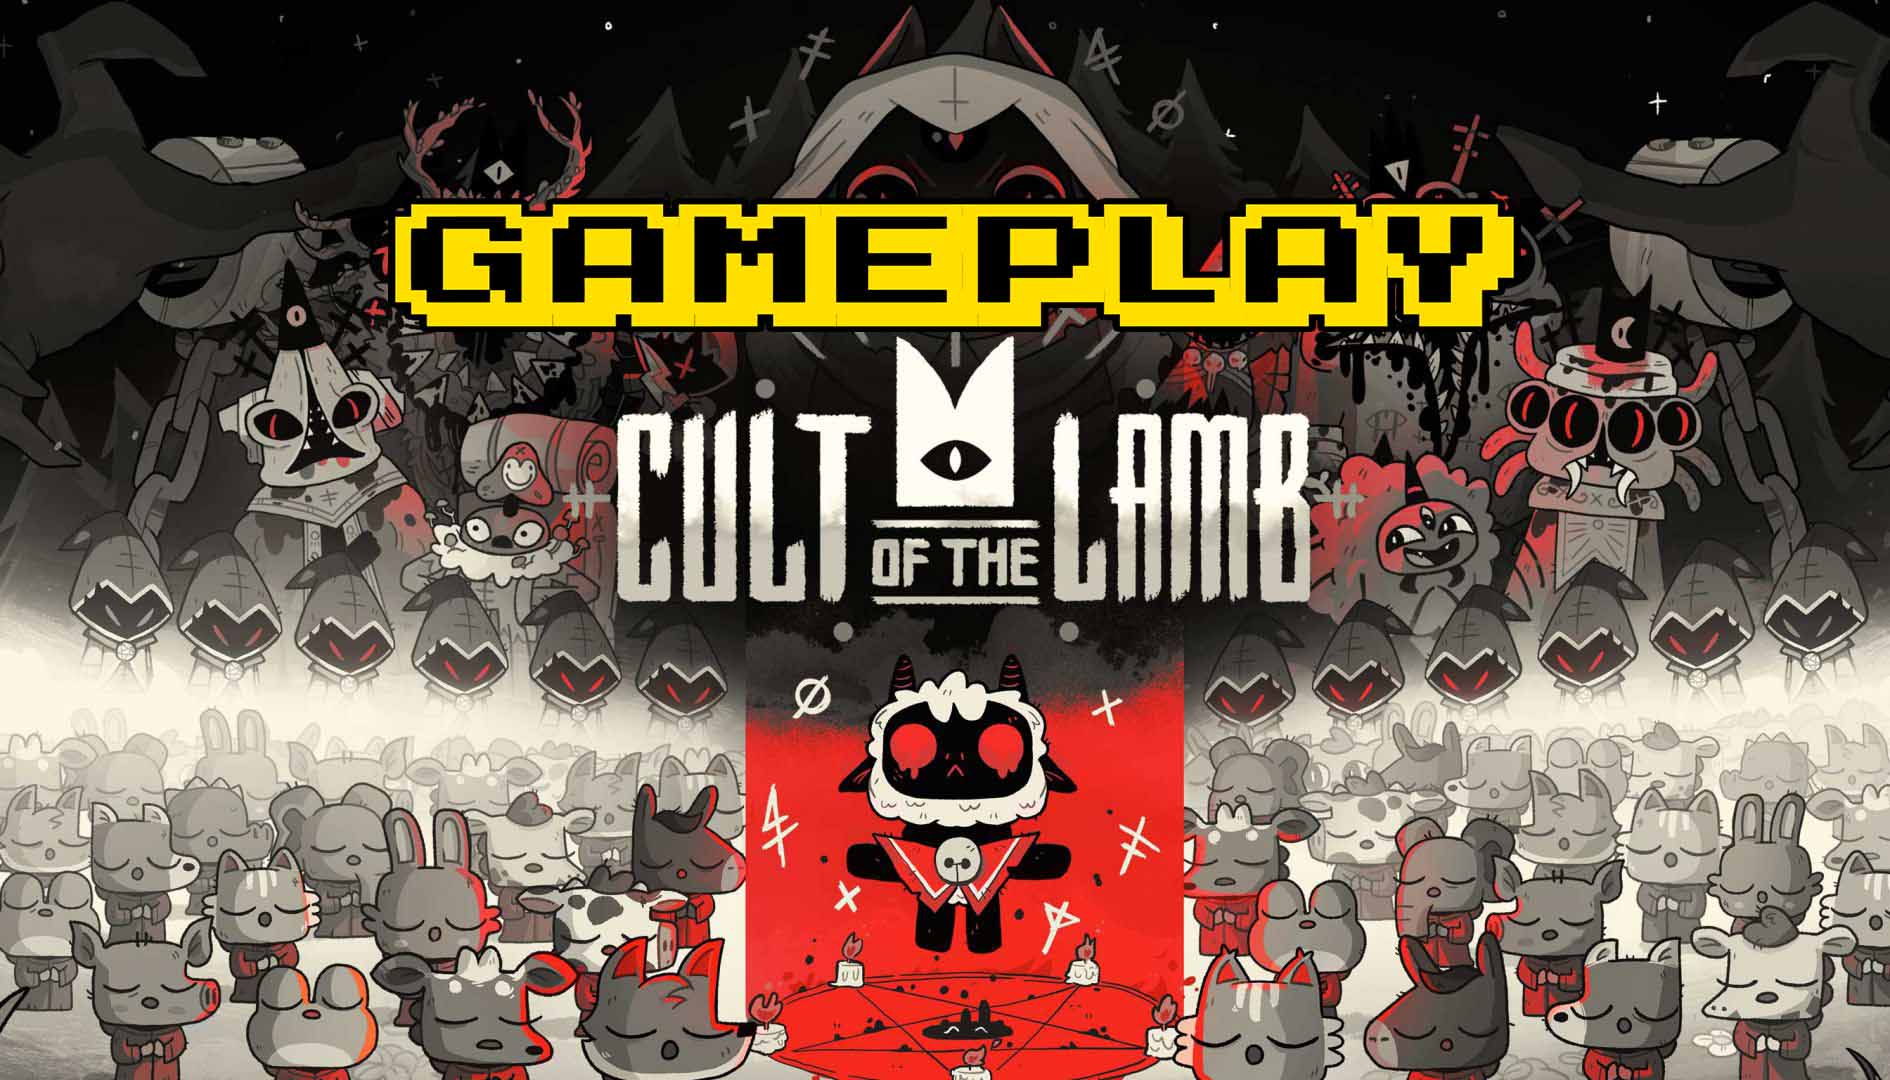 Cult of the Lamb Reviews - OpenCritic